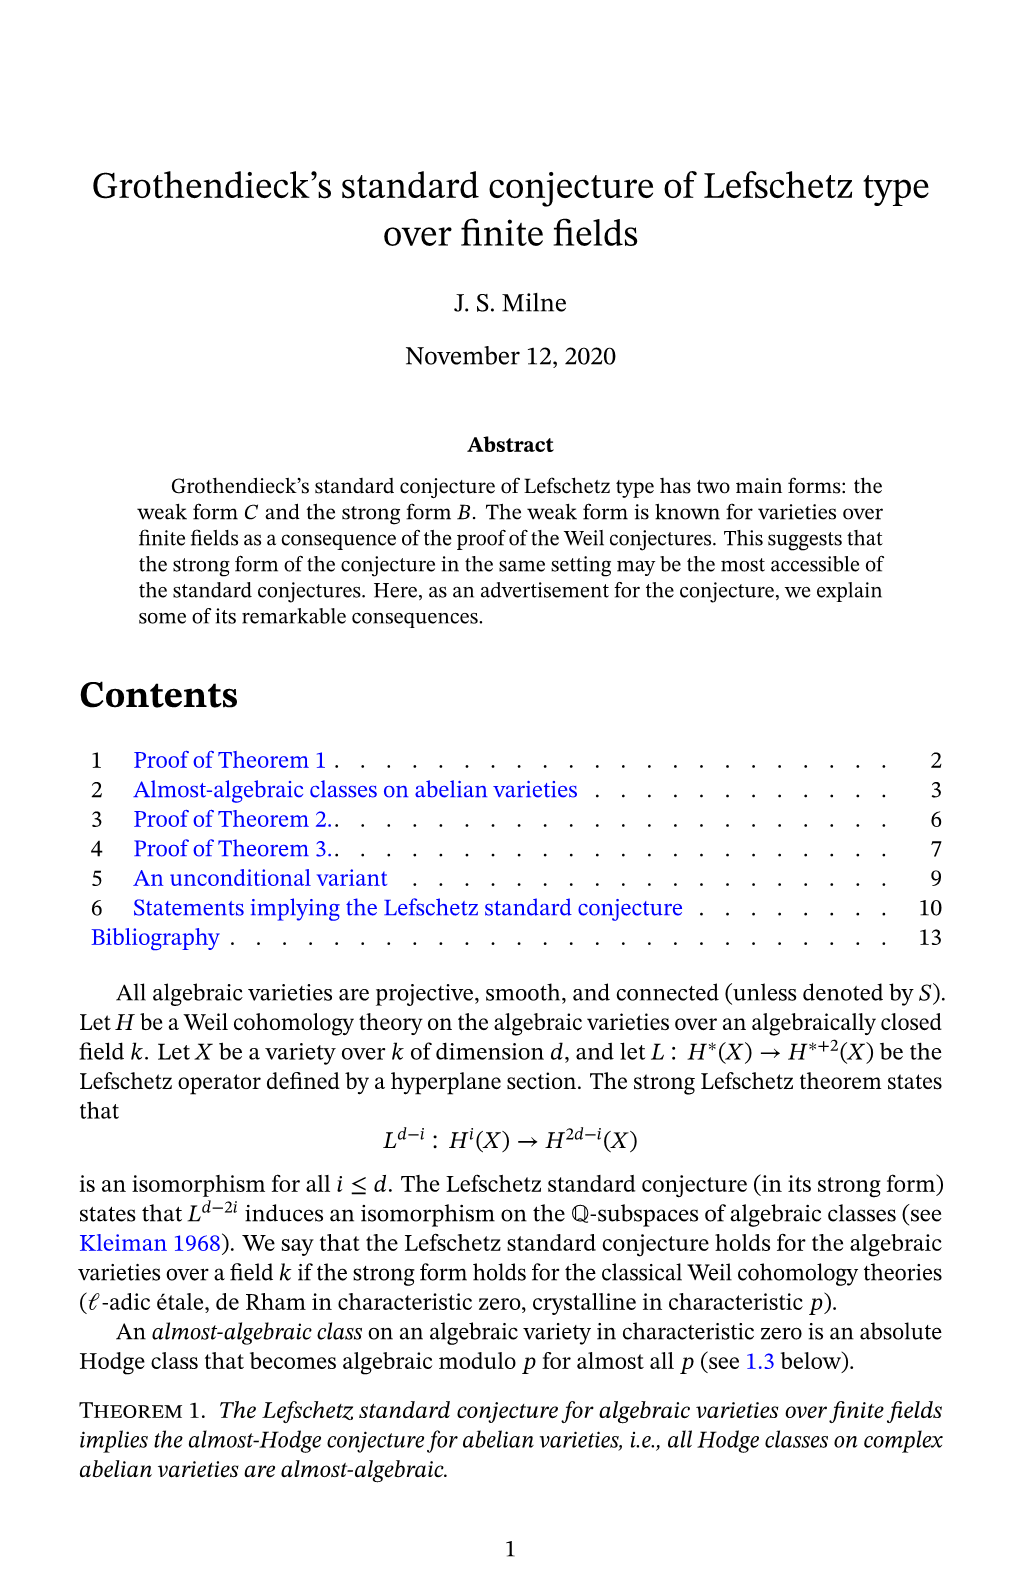 Consequences of the Lefschetz Standard Conjecture